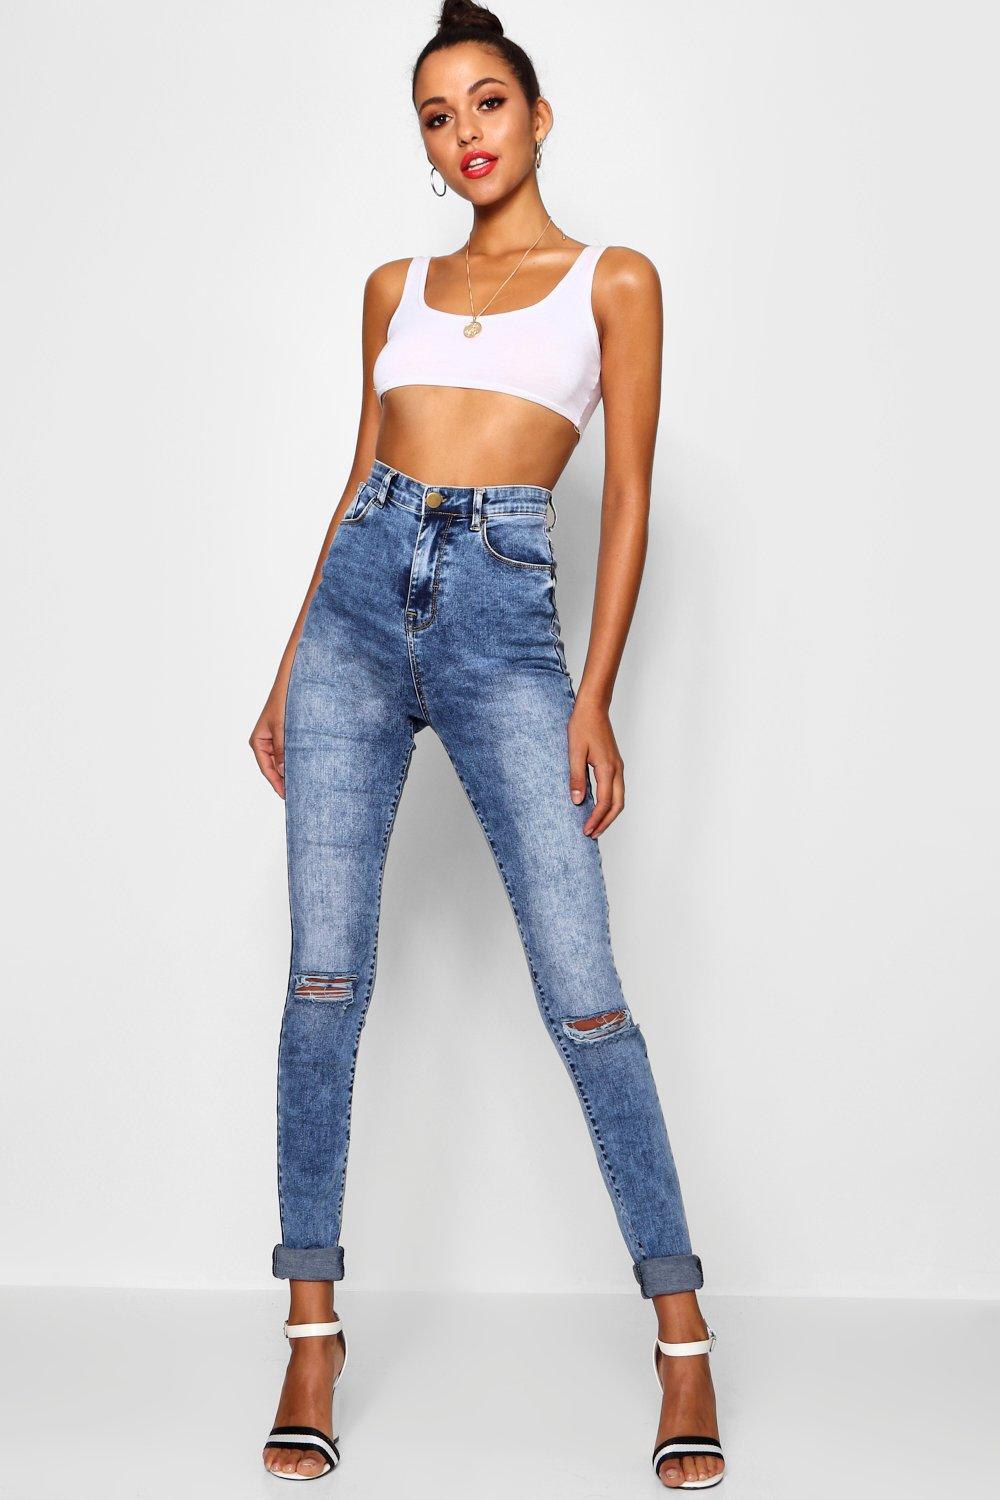 womens ripped jeans nz